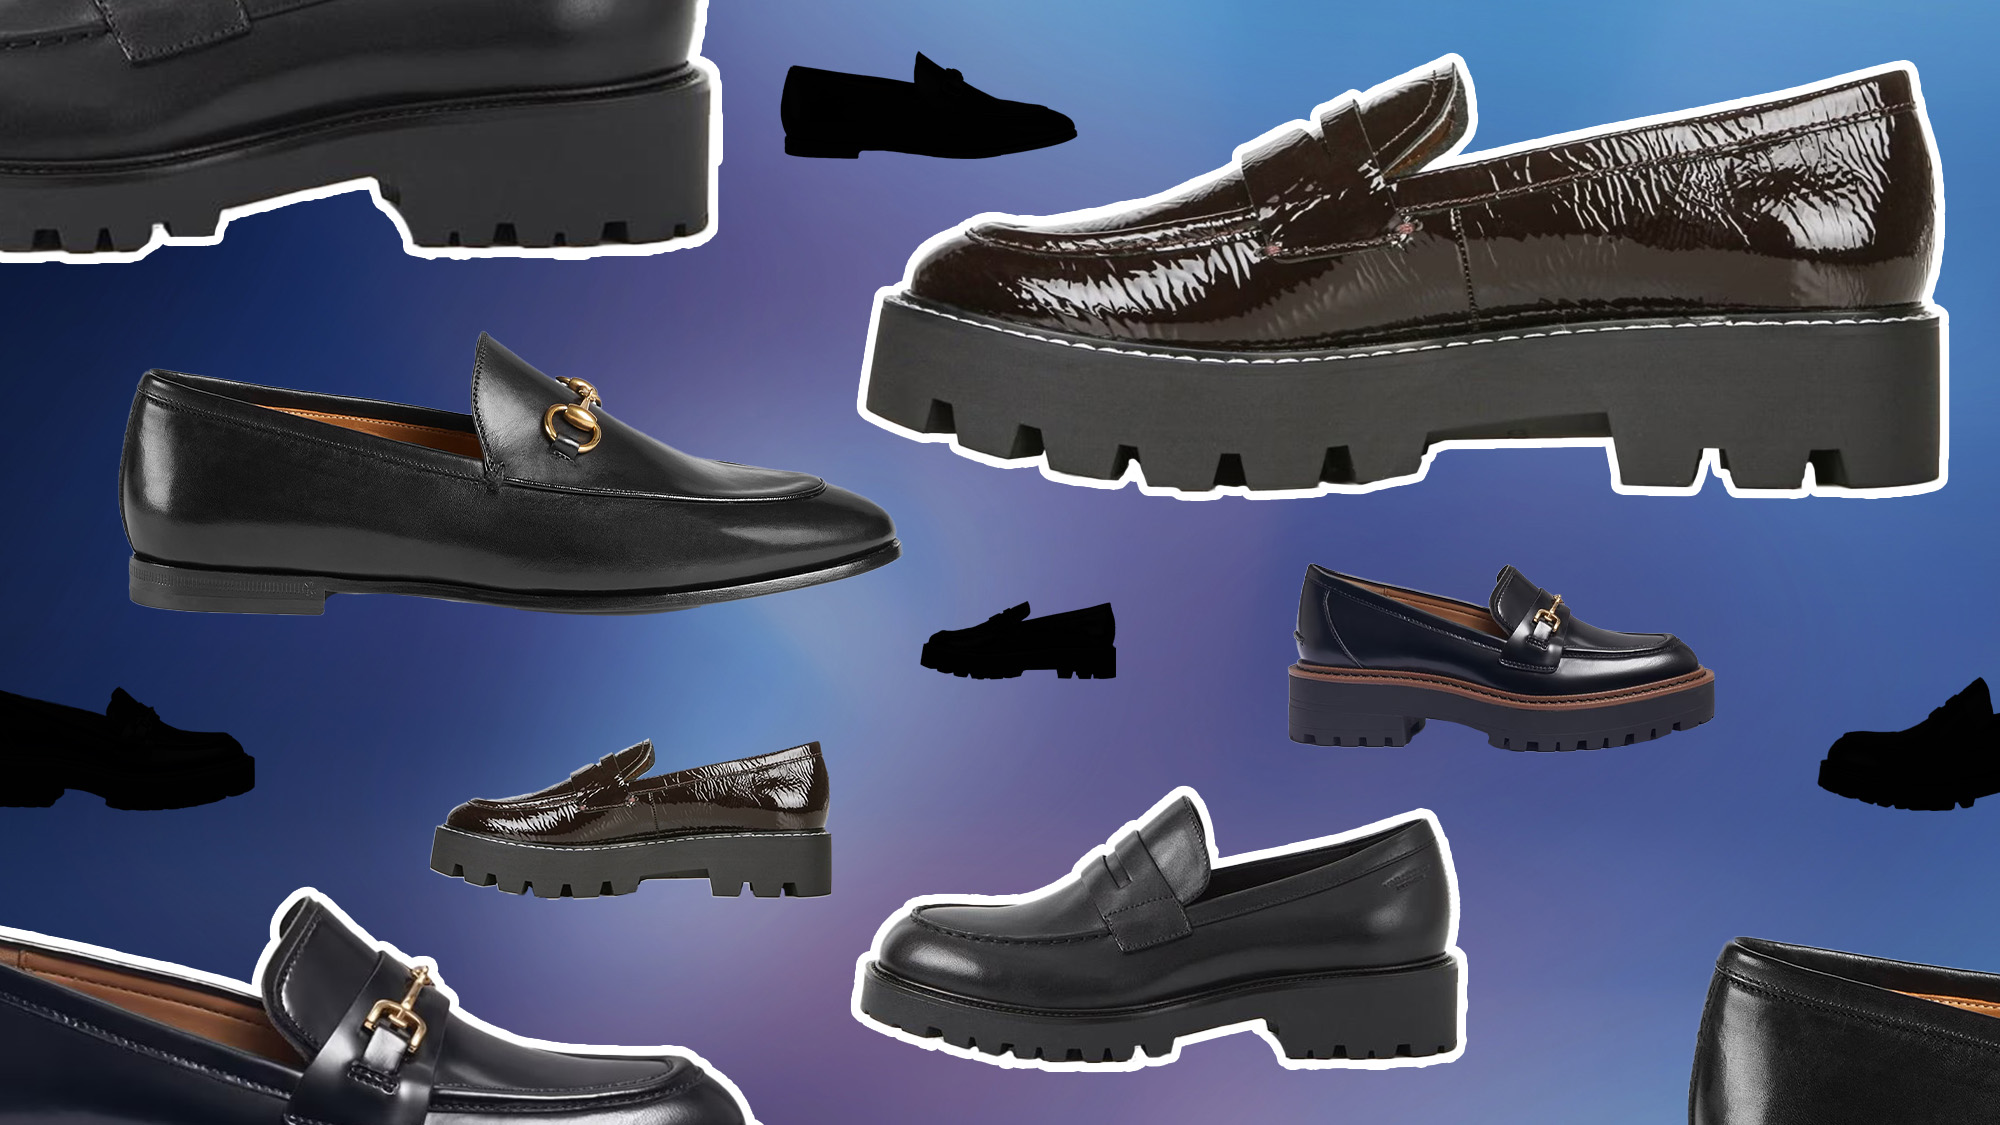 11 Ways to Wear Loafers for Any and All Occasions